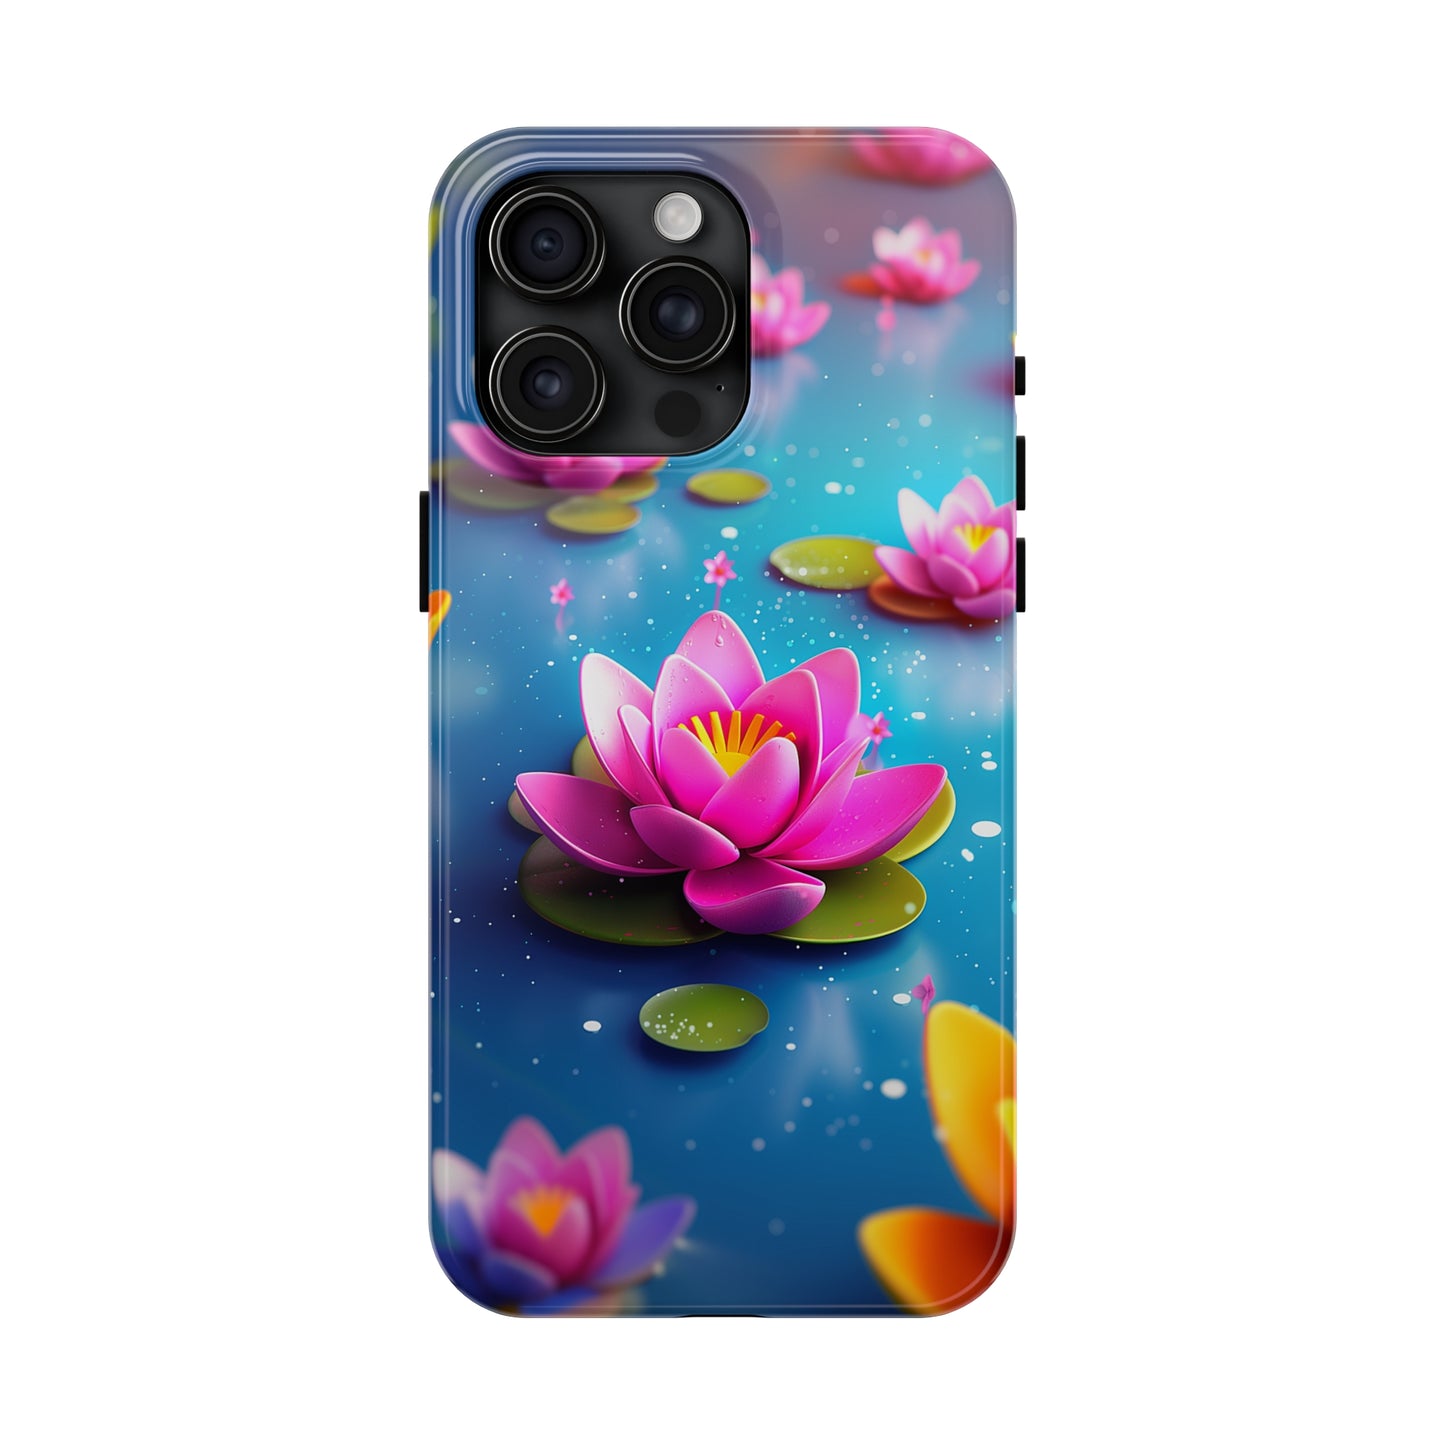 Lotus Lagoon (iPhone Case 11-15)Enhance your iPhone 11-15 with RIMA's Tough Case: Sleek design, double-layer protection, and wireless charging friendly. Perfect for the urban lifestyle.RimaGallery